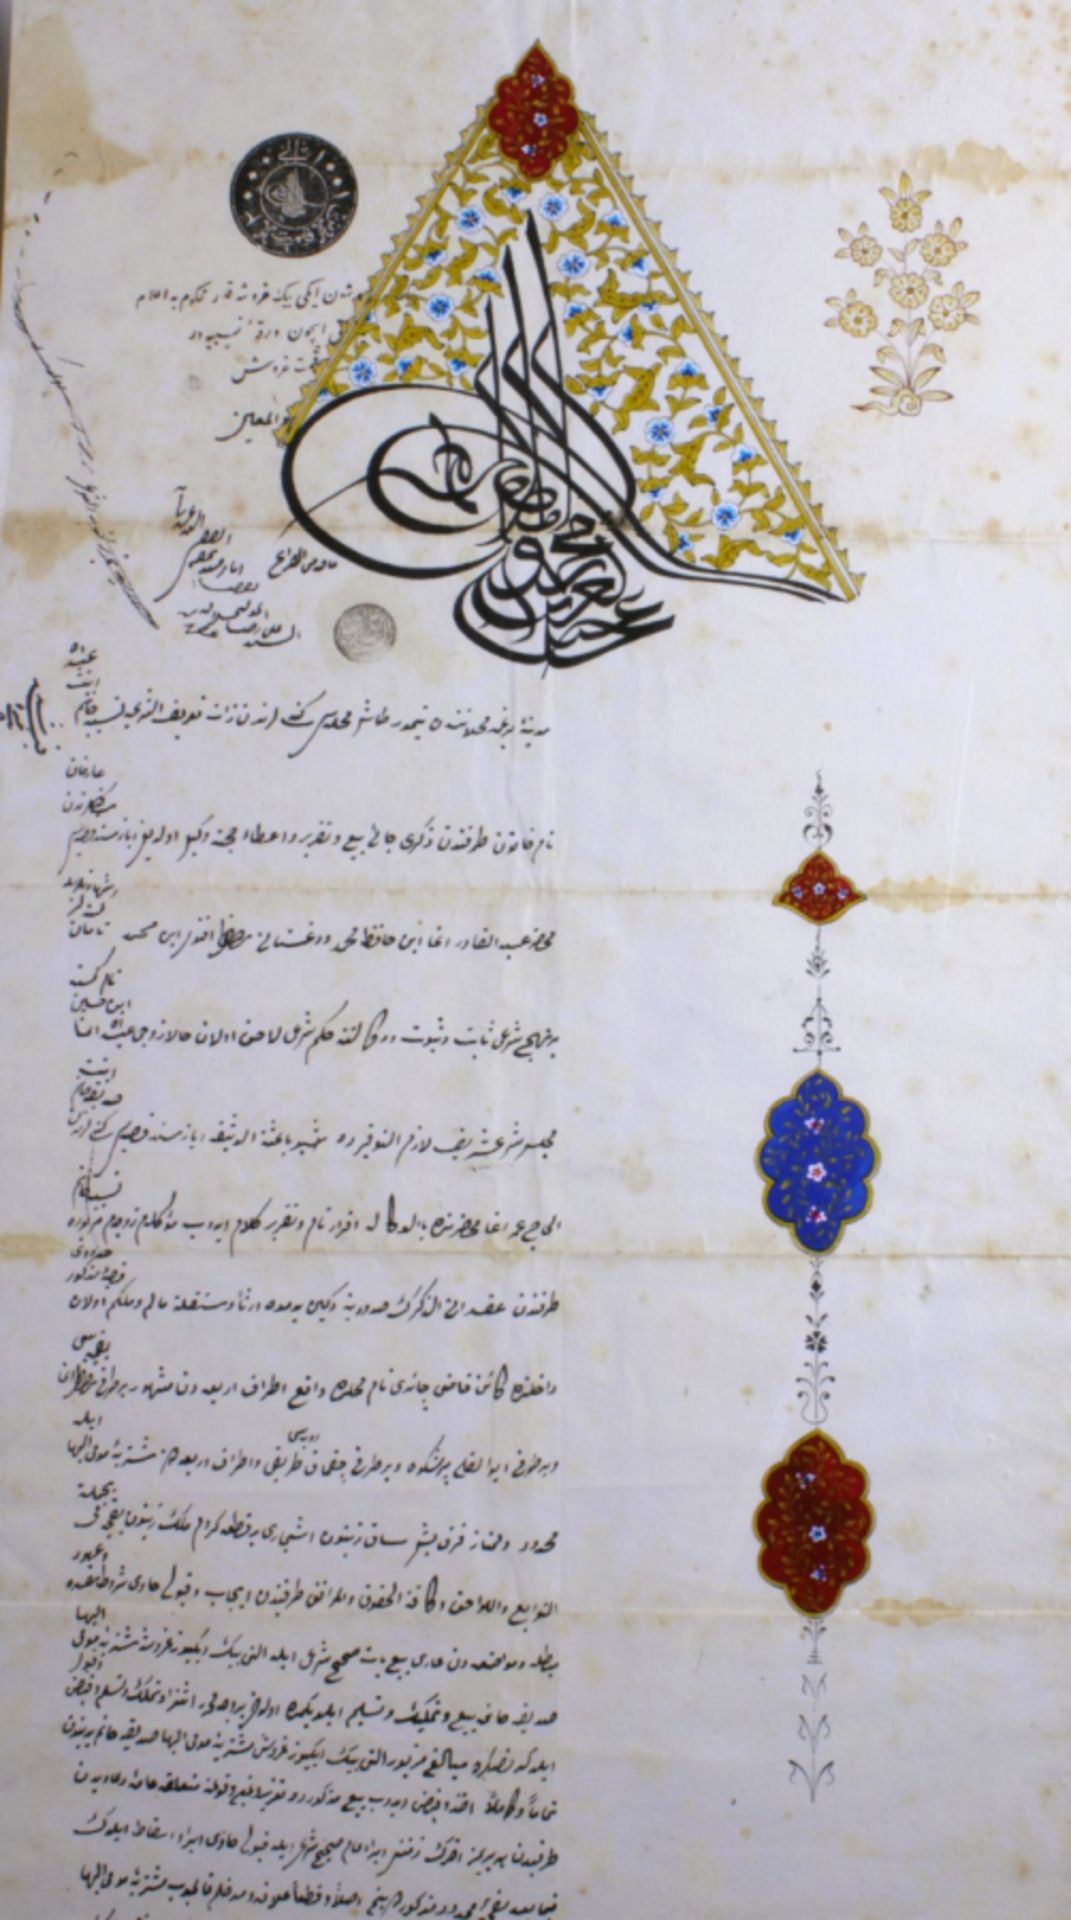 Ottoman empire Sultan Ahmed III period document - Image 2 of 7